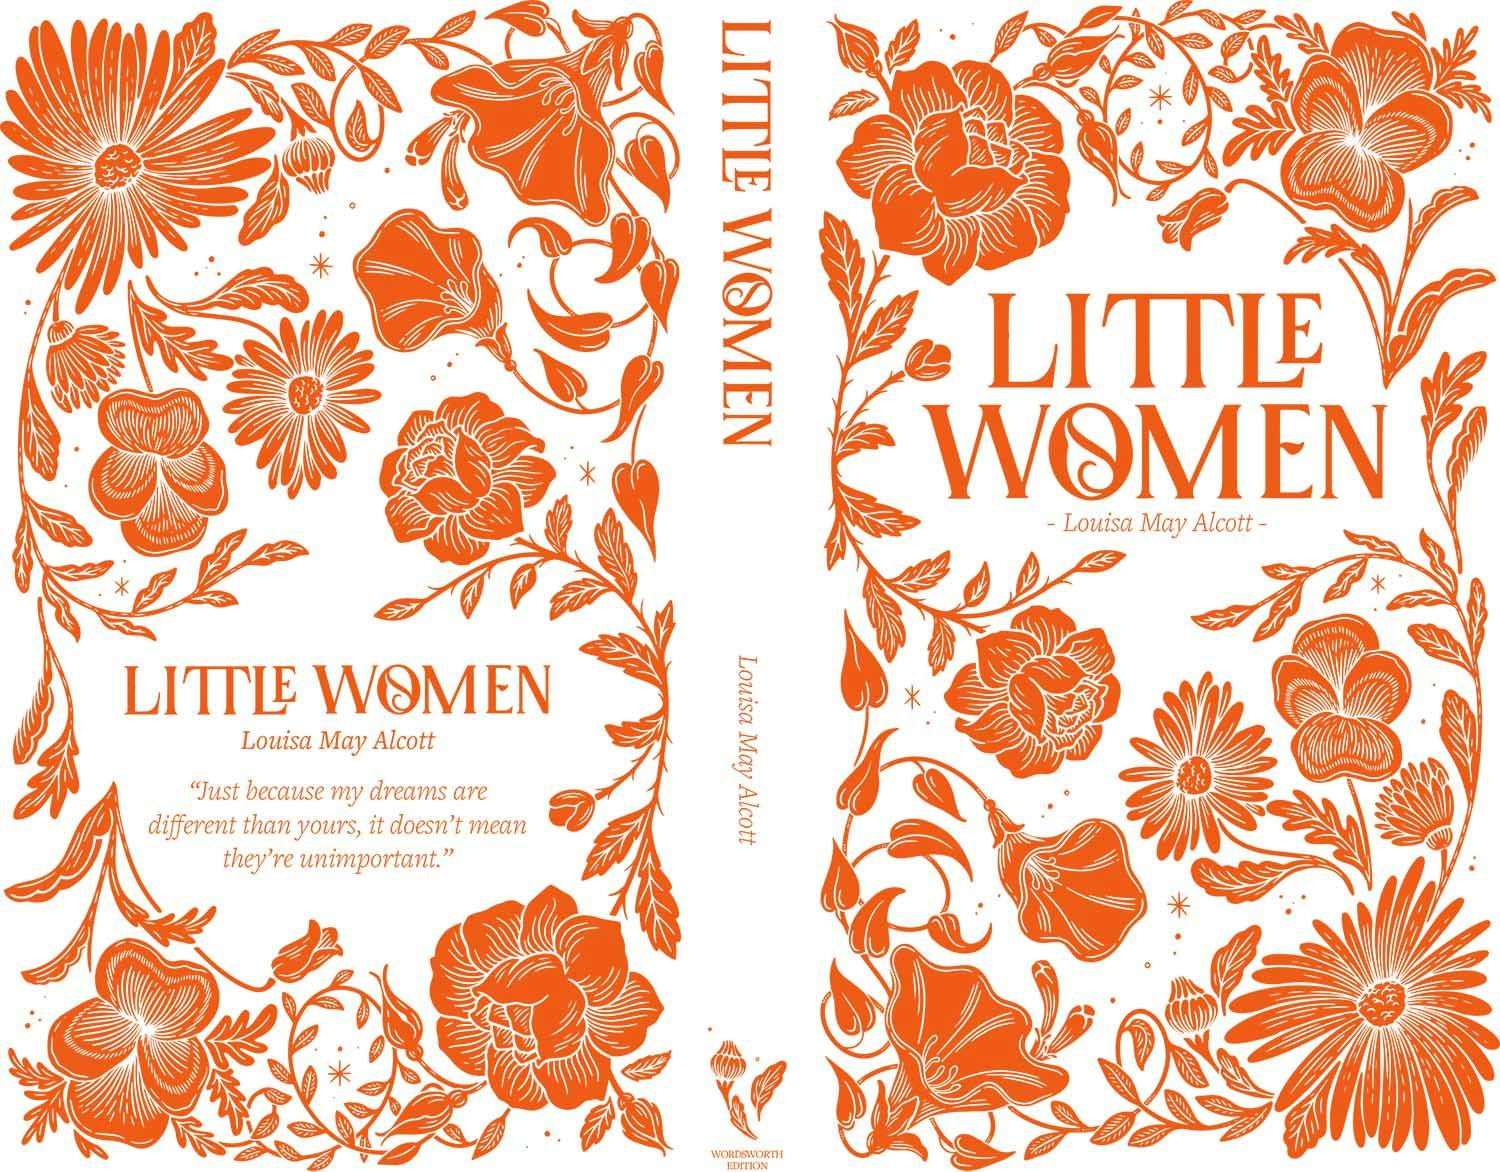 Little women illustration and Typography cover